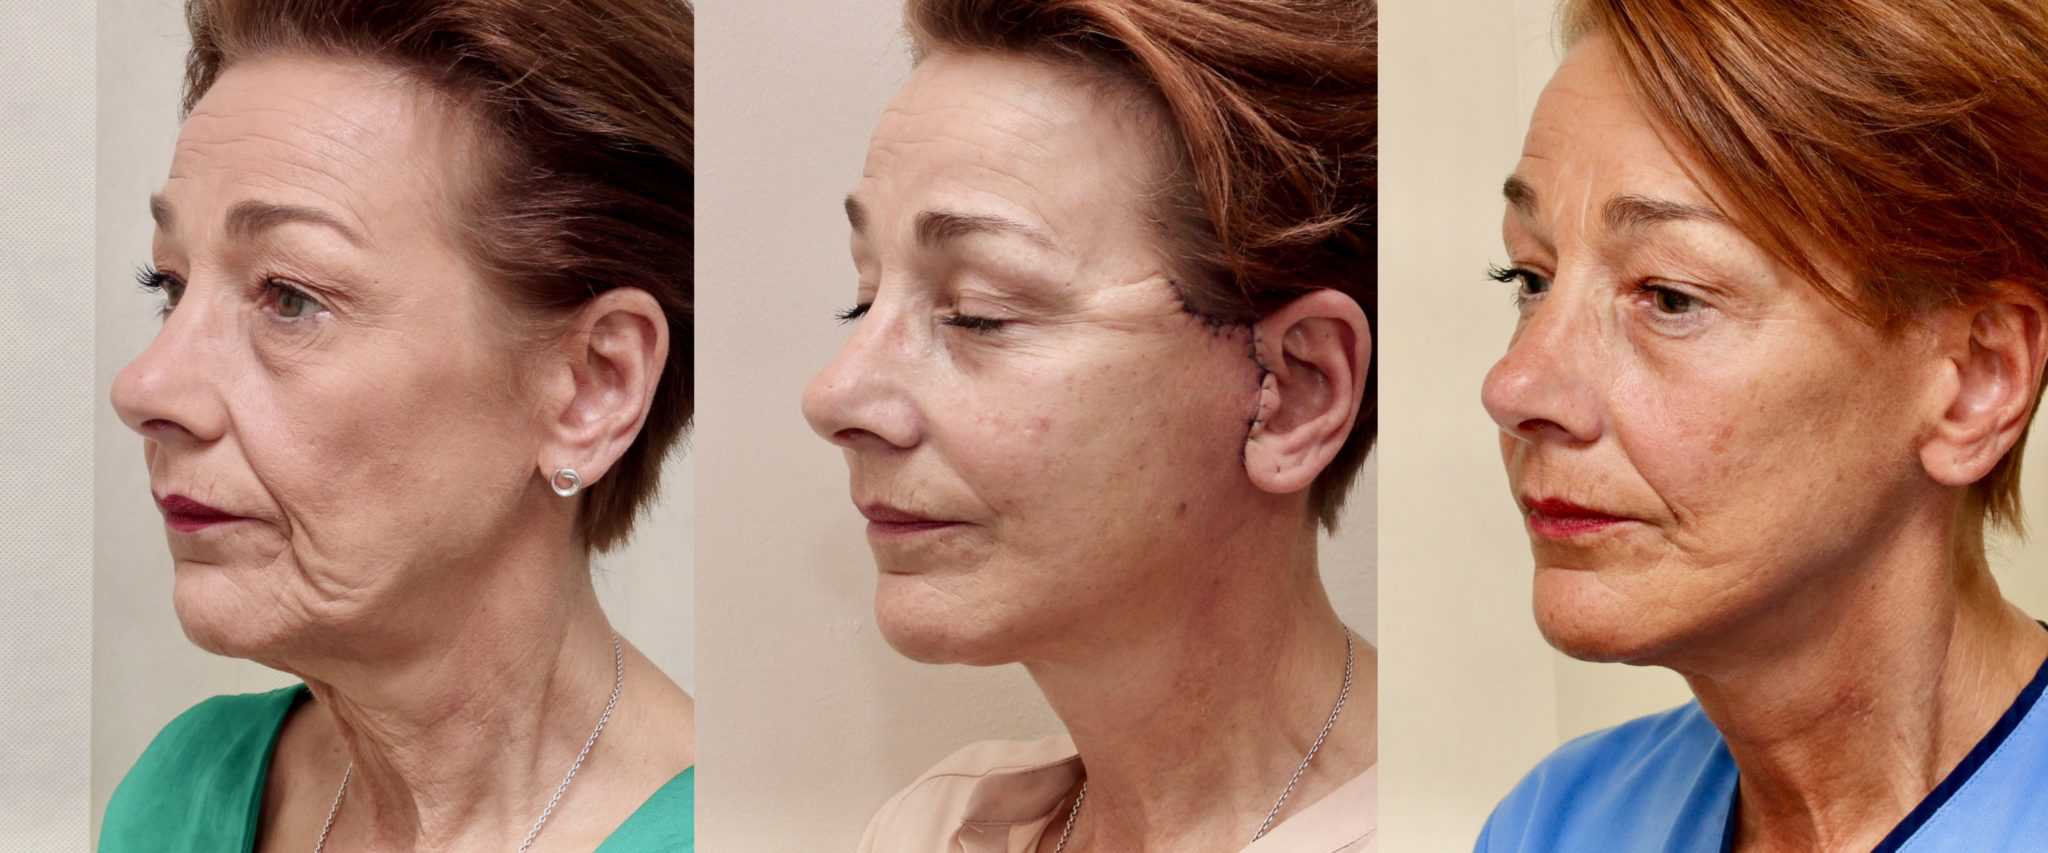 Before and after facelift, 6 days and 6 months post op